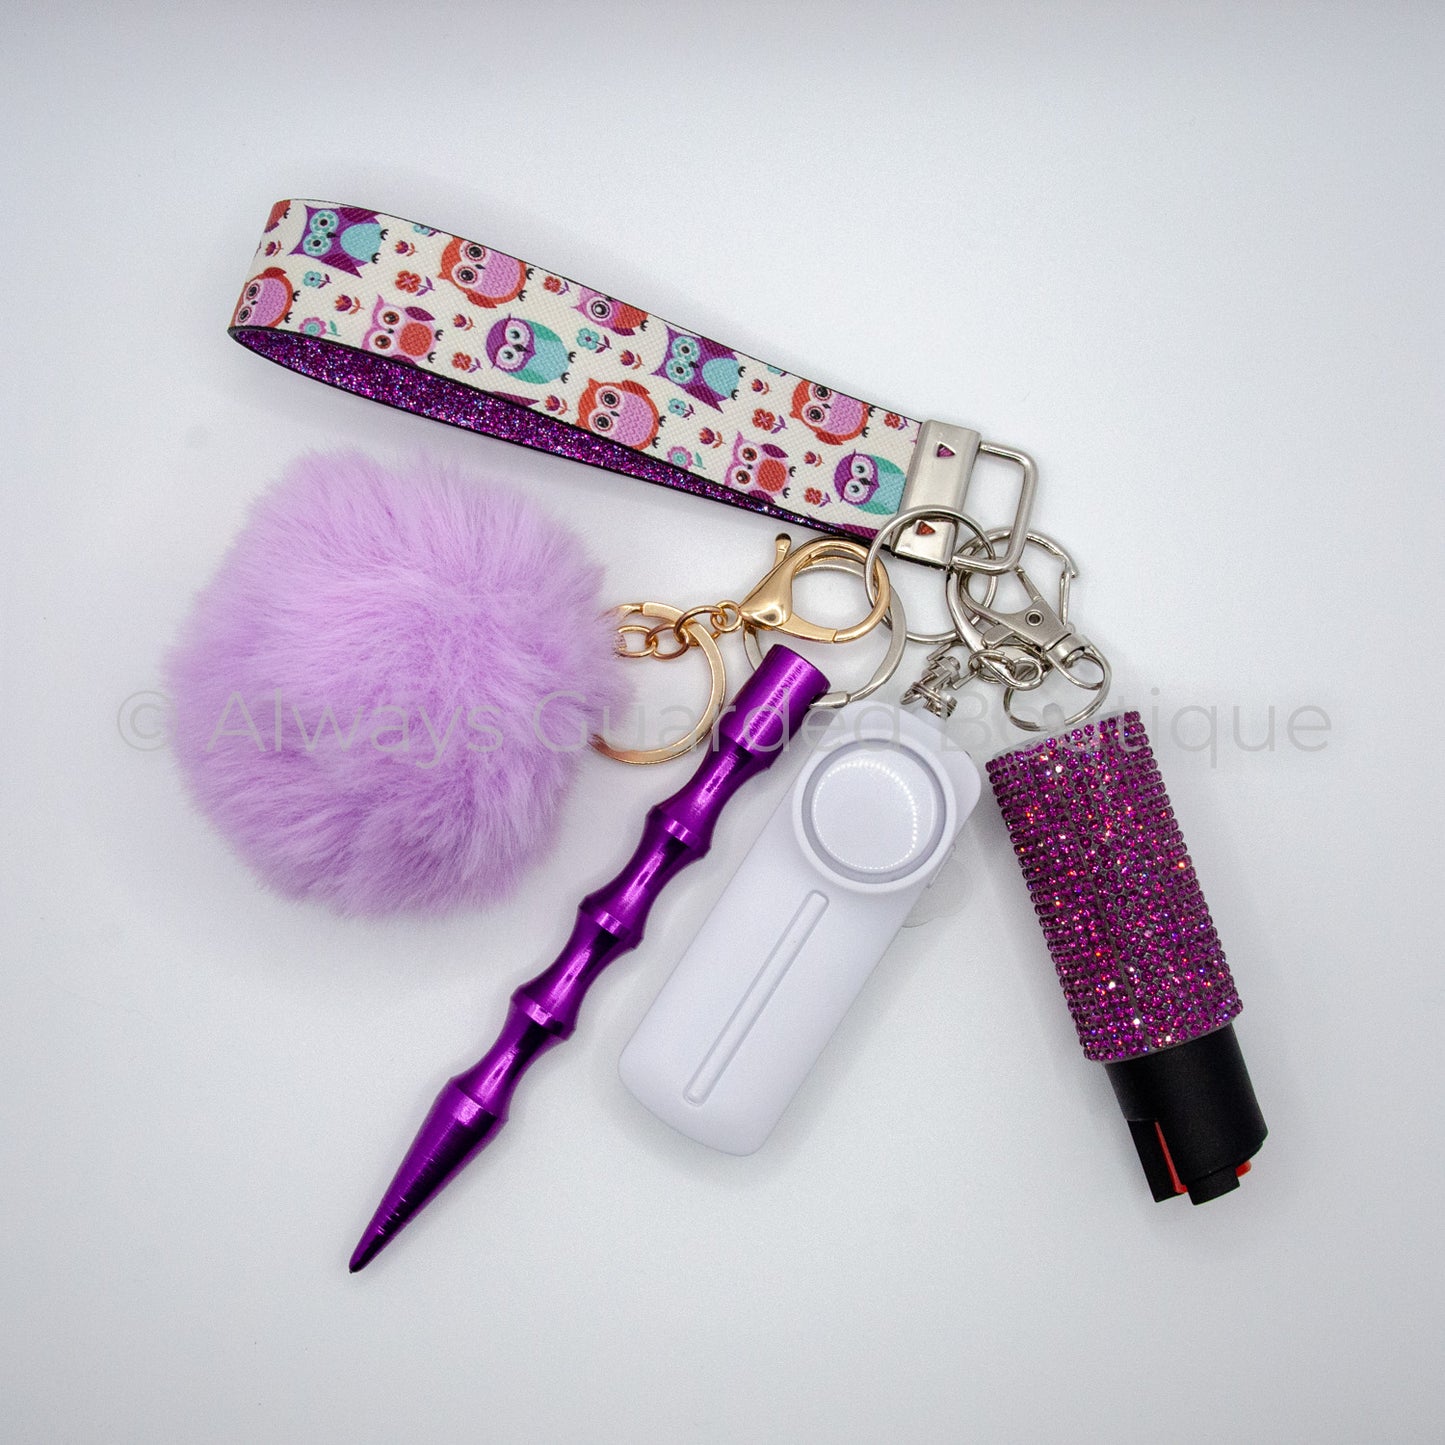 Owls Safety Keychain with Optional Pepper Spray